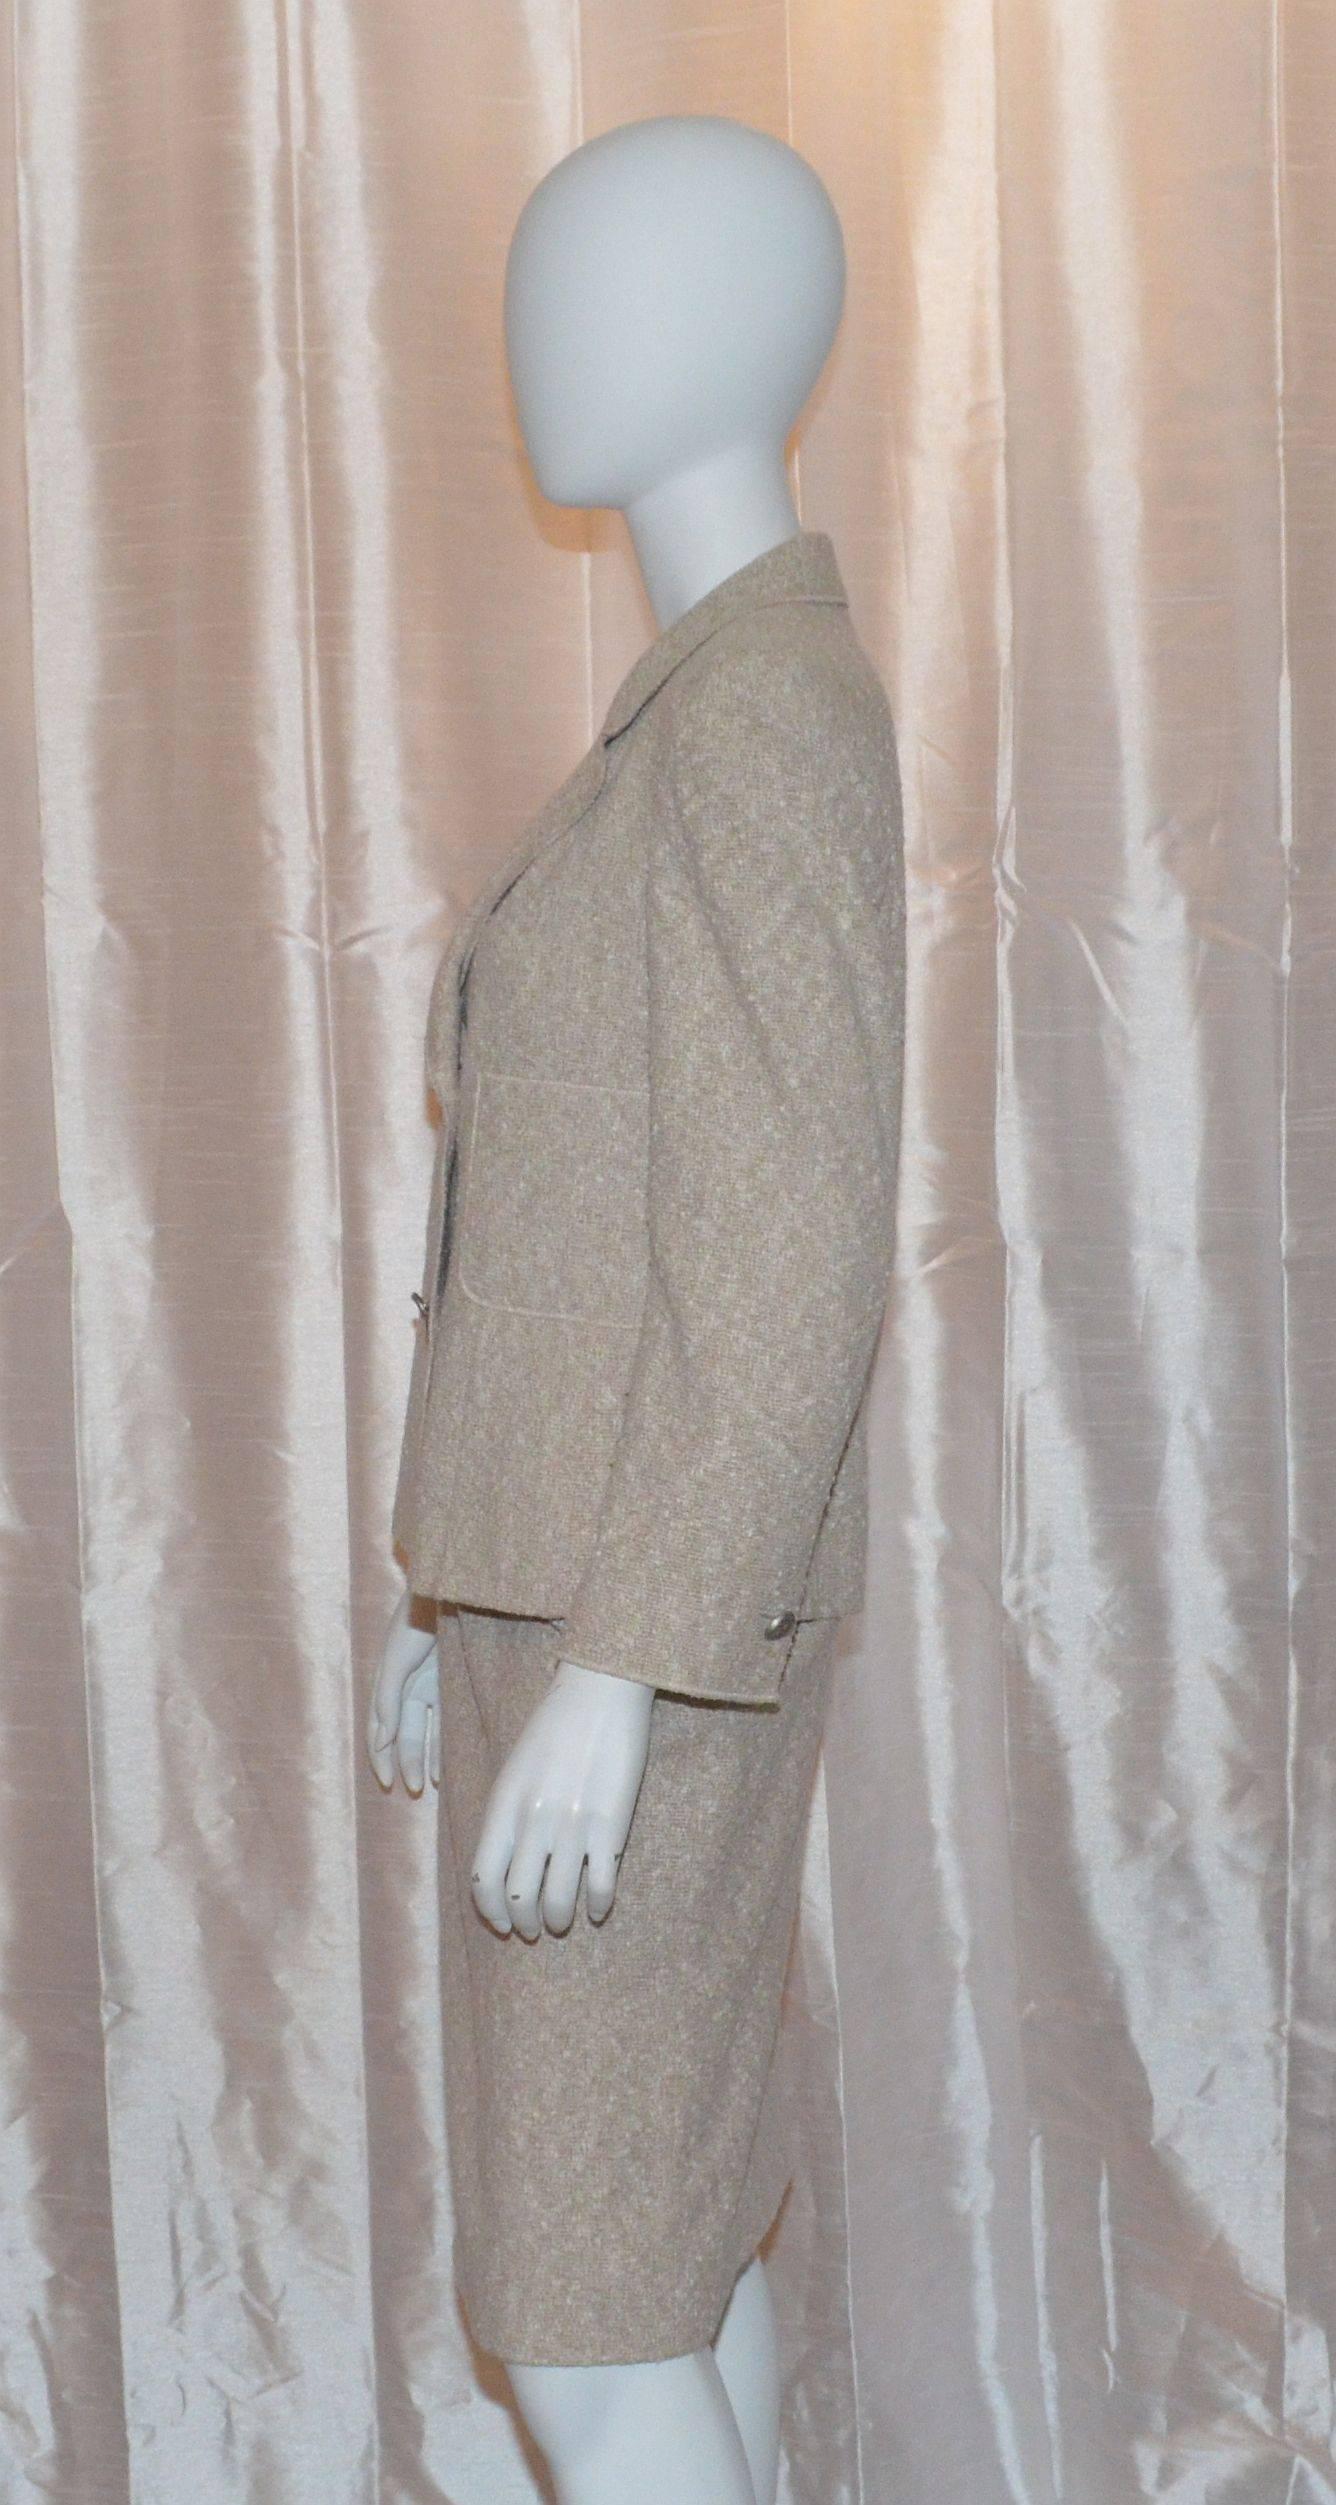 Classic Chanel suit jacket has silver-tone button closures at the front, two slip pockets at the bust, and jacket is fully lined. 54% cotton, 42% wool, 4% nylon, and lined in 100% silk. Skirt features a side zipper and hook-and-eye closure.